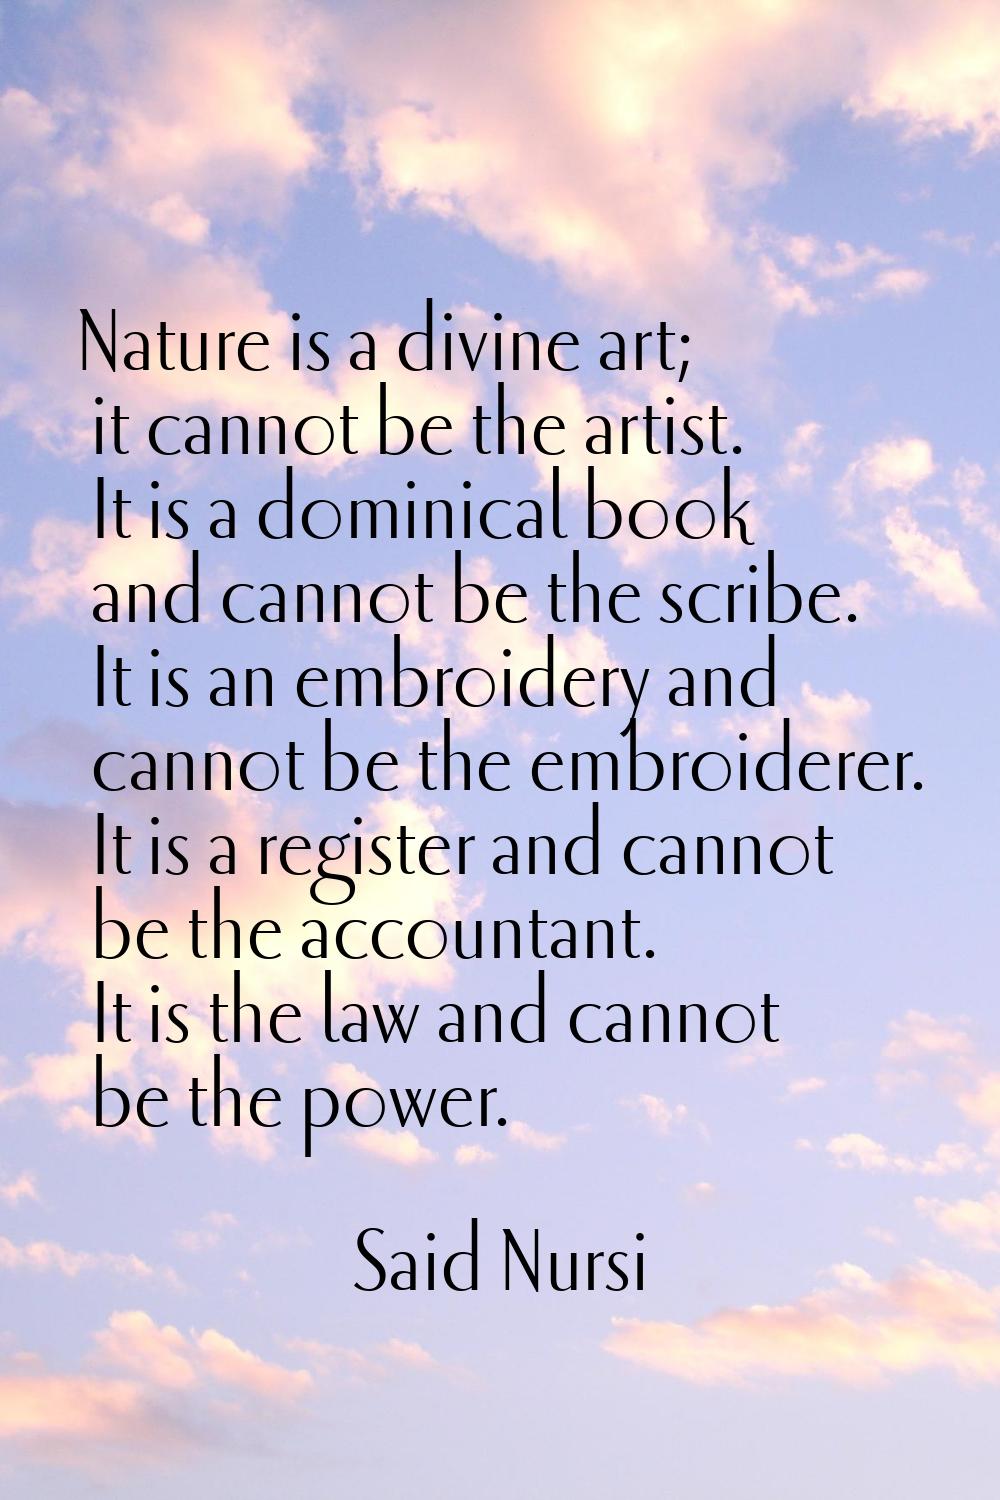 Nature is a divine art; it cannot be the artist. It is a dominical book and cannot be the scribe. I